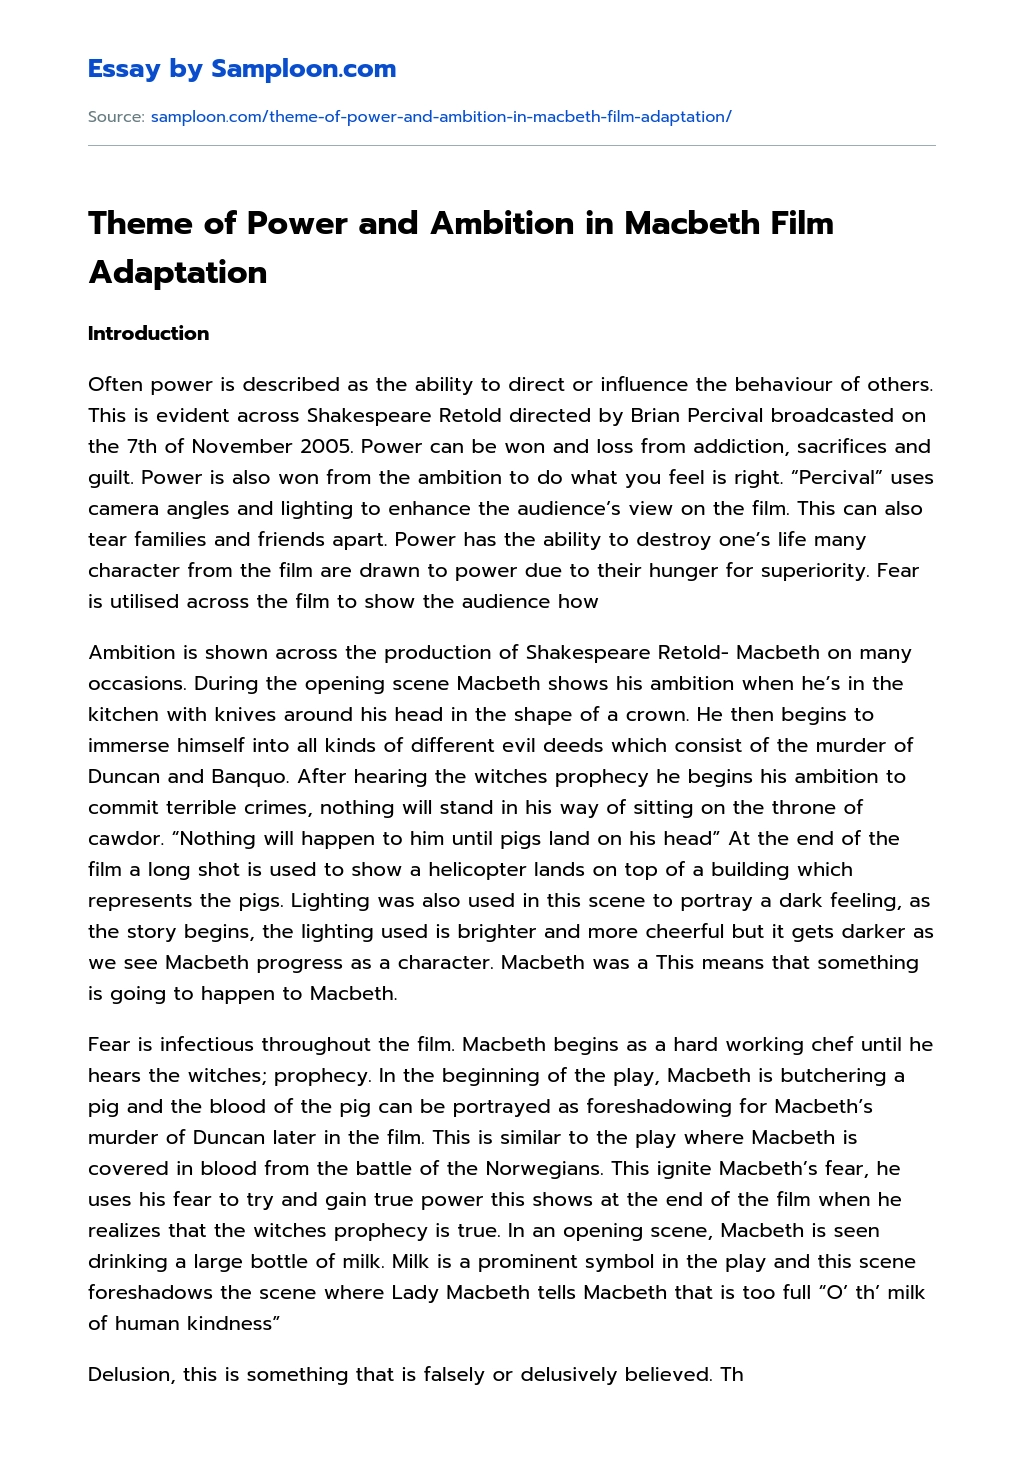 Theme of Power and Ambition in Macbeth Film Adaptation essay